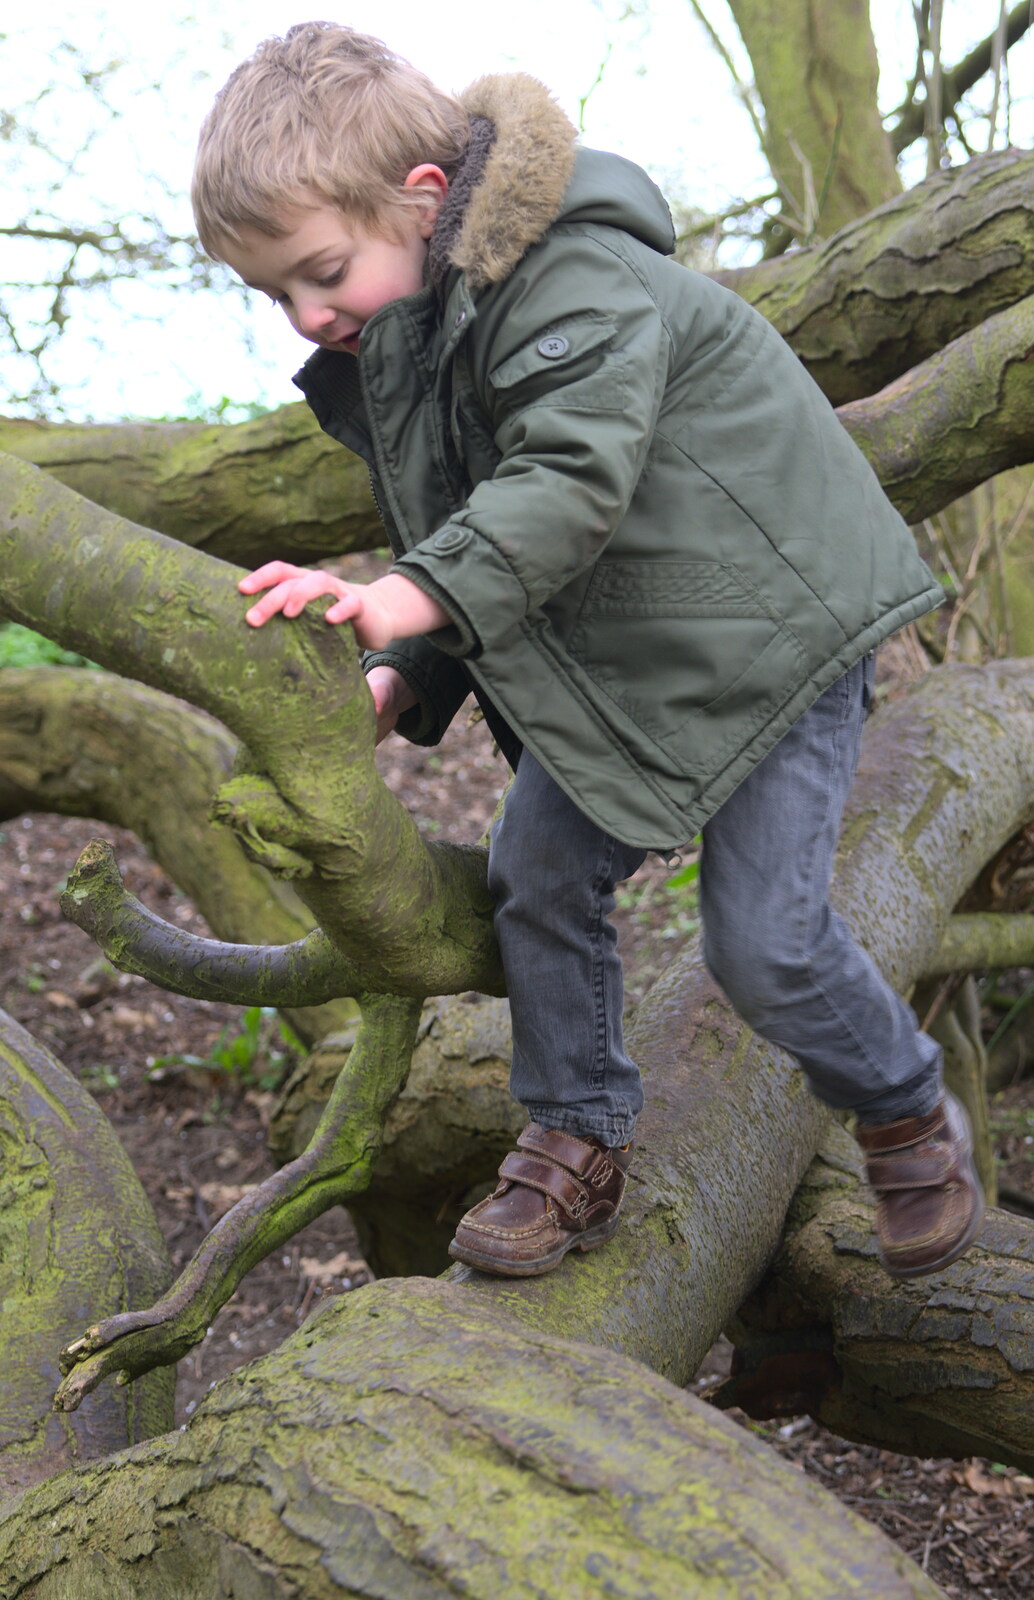 Climbing in the climbey tree from A Trip to Orford Castle, Orford, Suffolk - 2nd March 2014